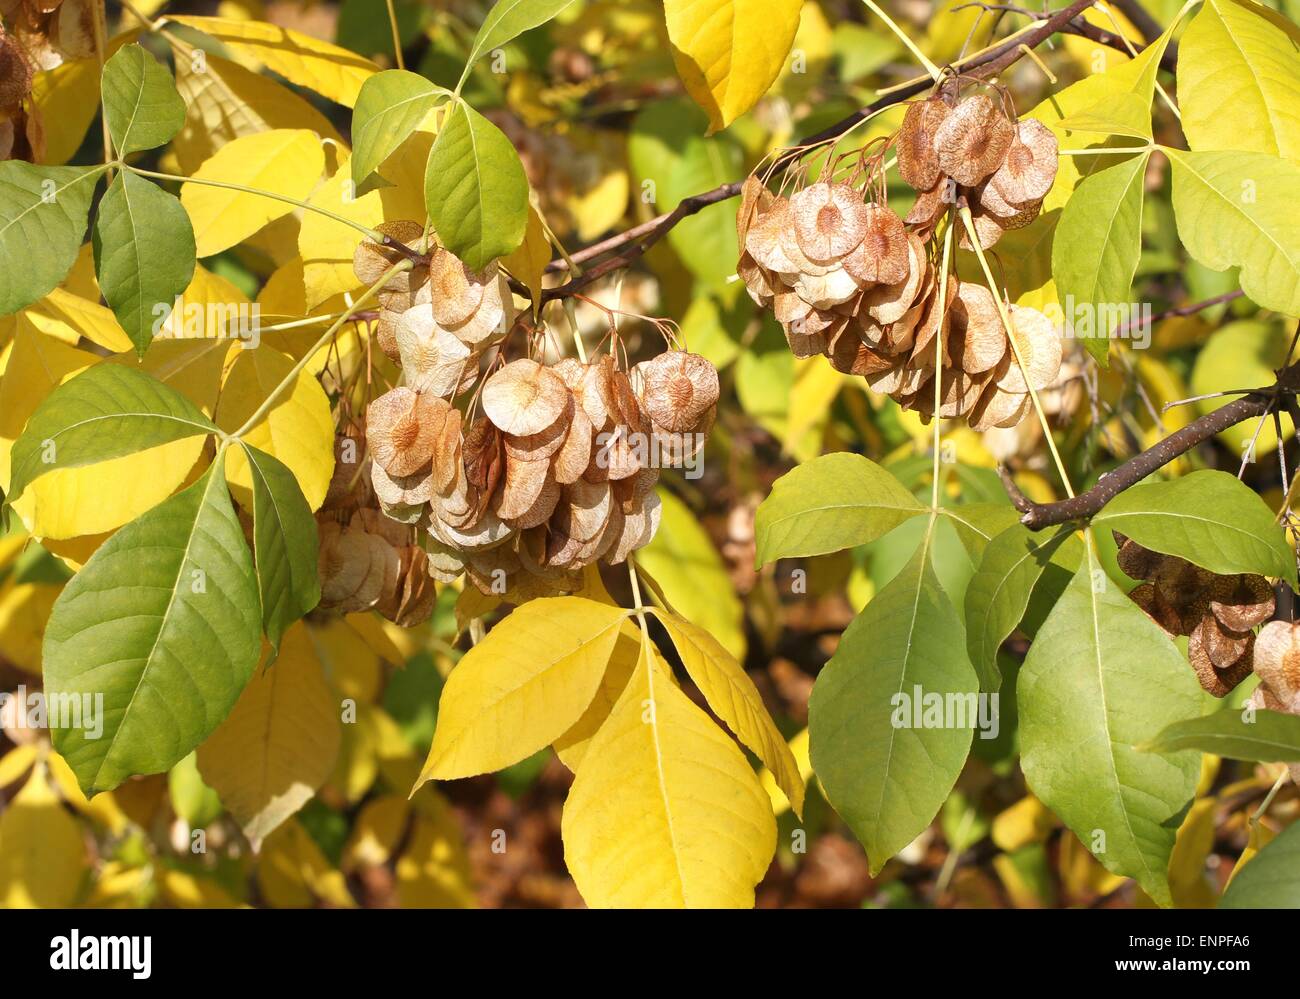 Autumn - green and yellow leaves and key fruits on ash tree Stock Photo